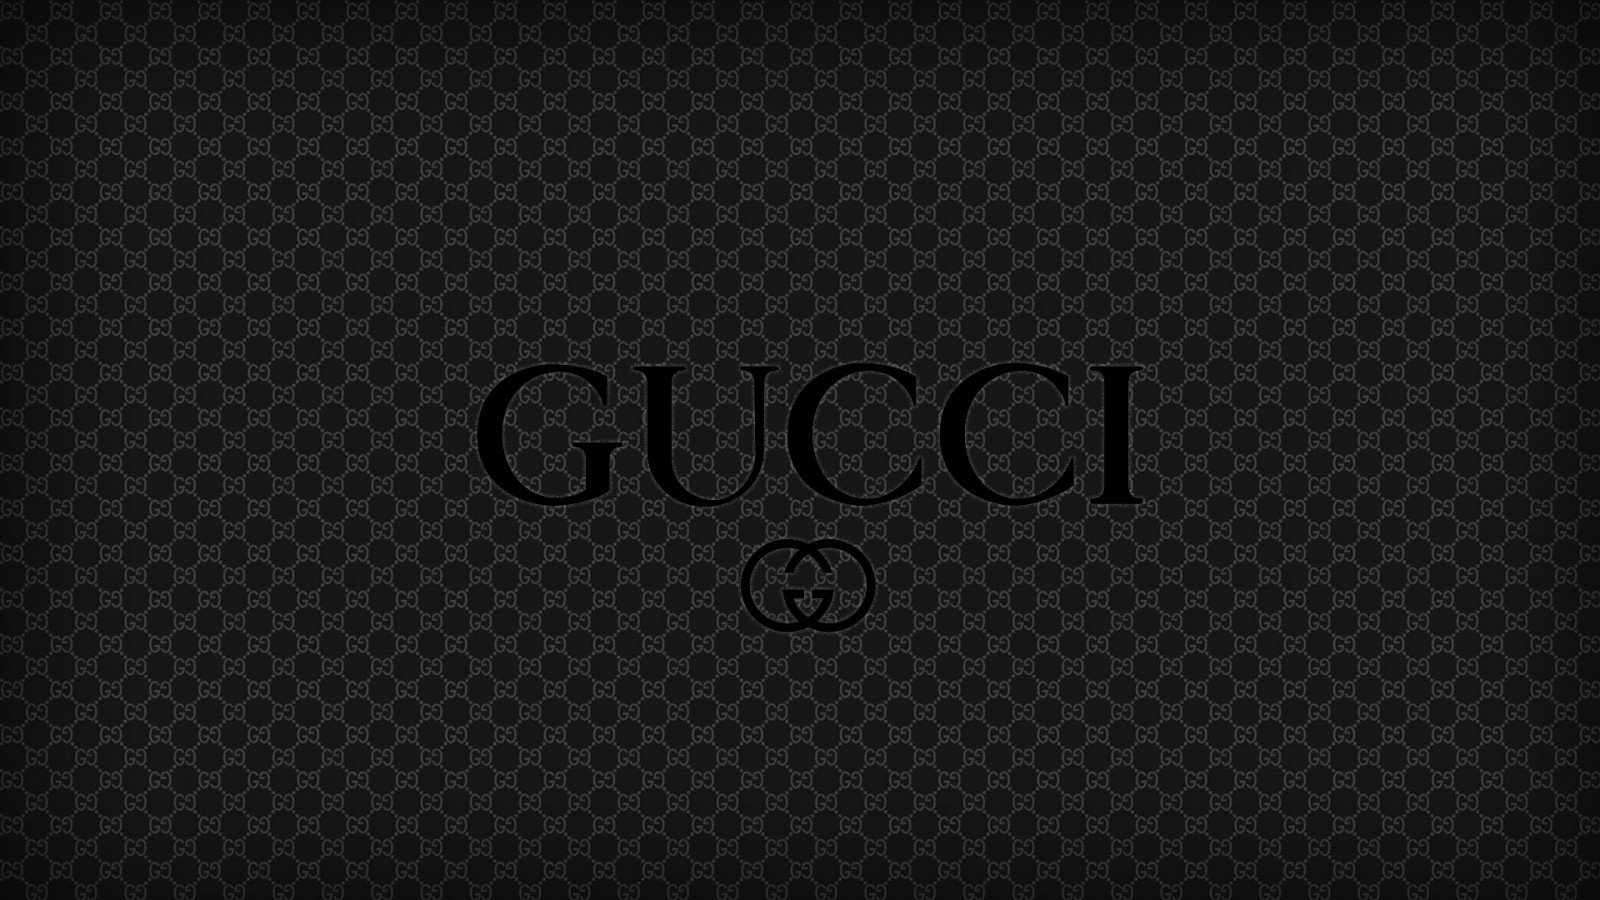 Pin Gucci Brand Logo Background Download Cool Hd Wallpapers Here on 1600x900